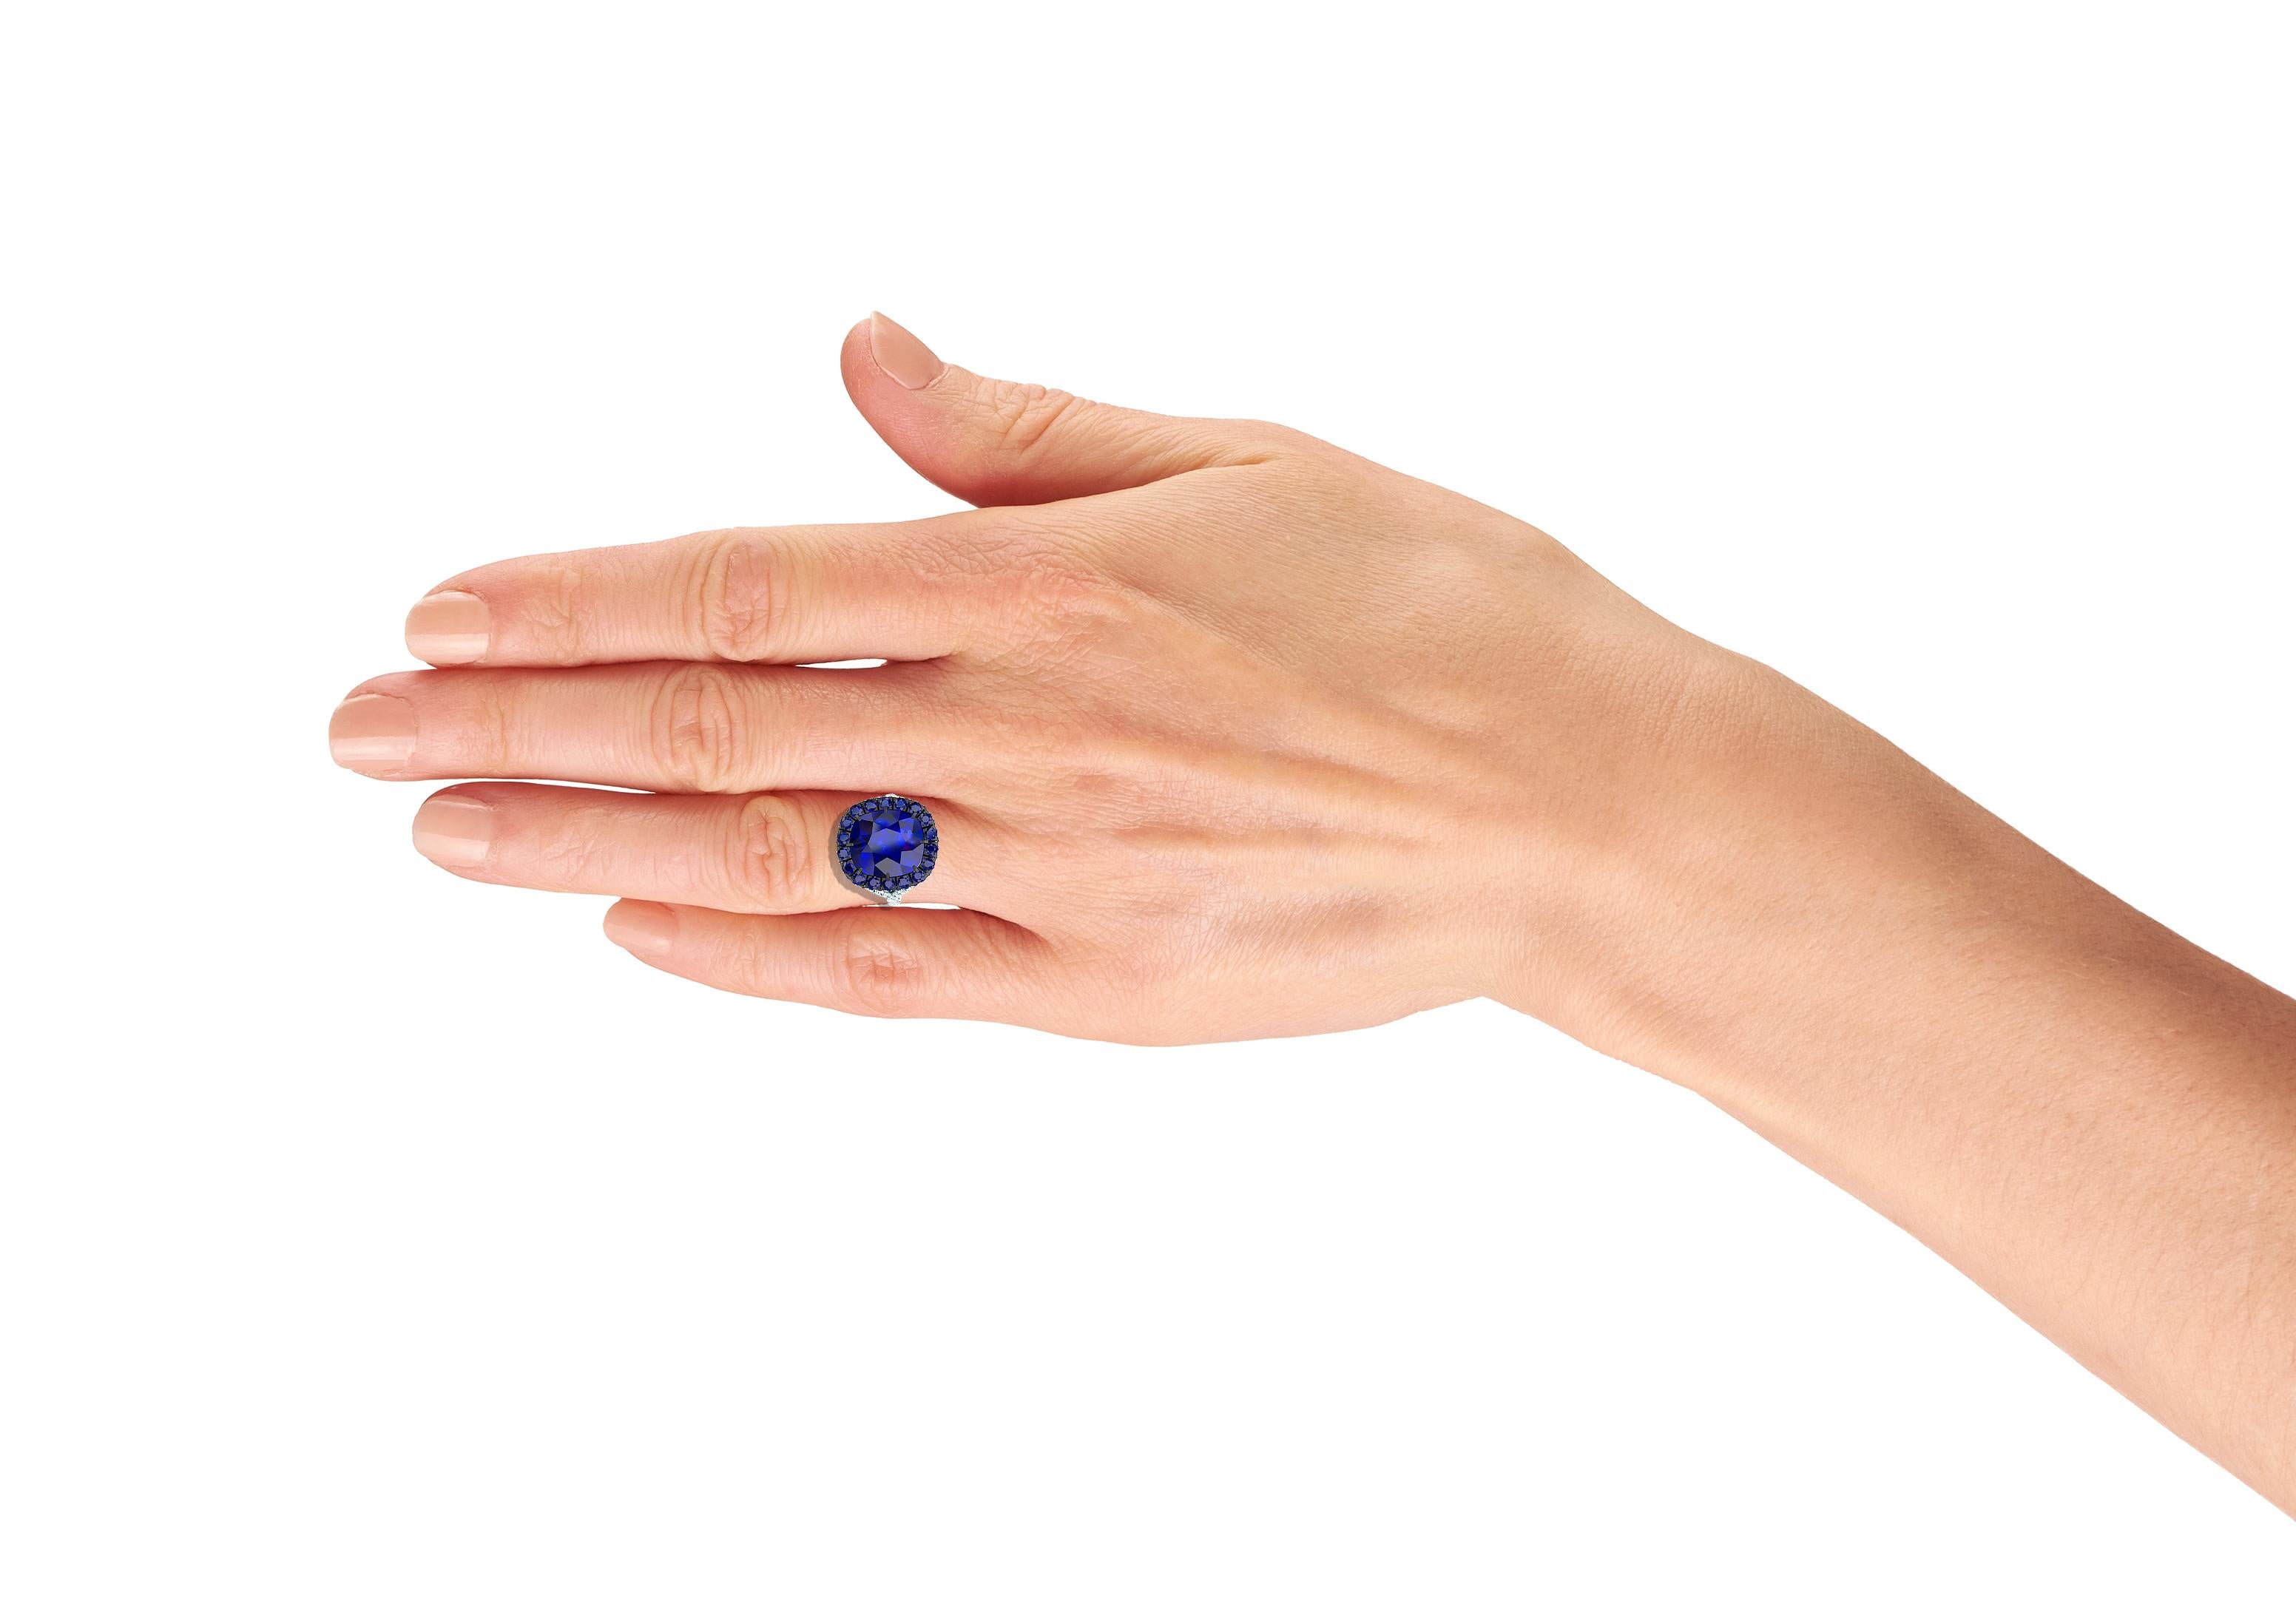 A beautiful blue sapphire and diamond ring has a center stone that's cushion cut and has deep rich blue color. The center stone is surrounded by over 1.3 carats of matching blue sapphires set in blackened silver and gold. The sapphires are accented